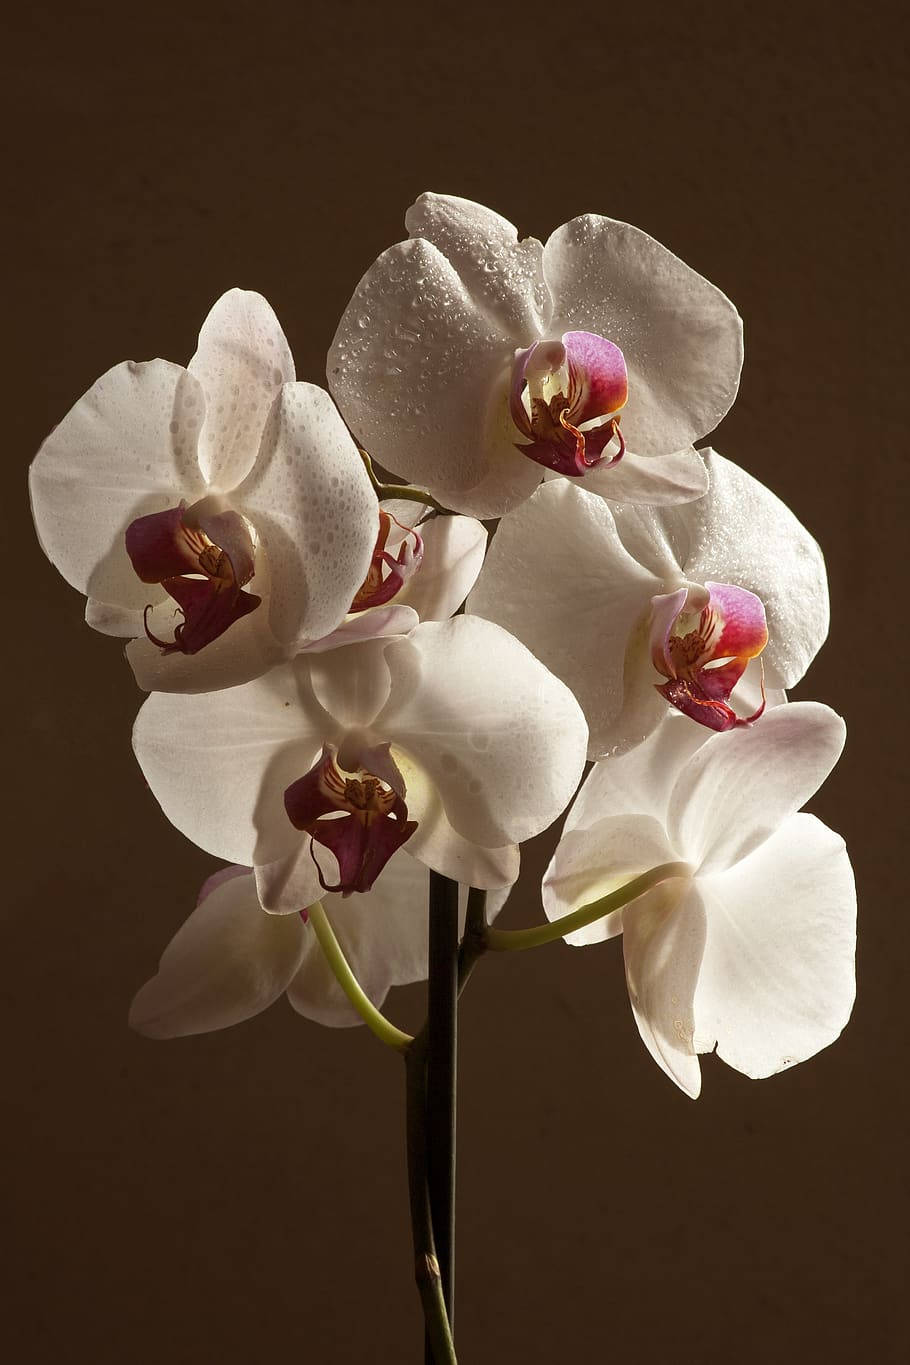 Vibrant Orchid Blooms in Tonal Contrast Wallpaper